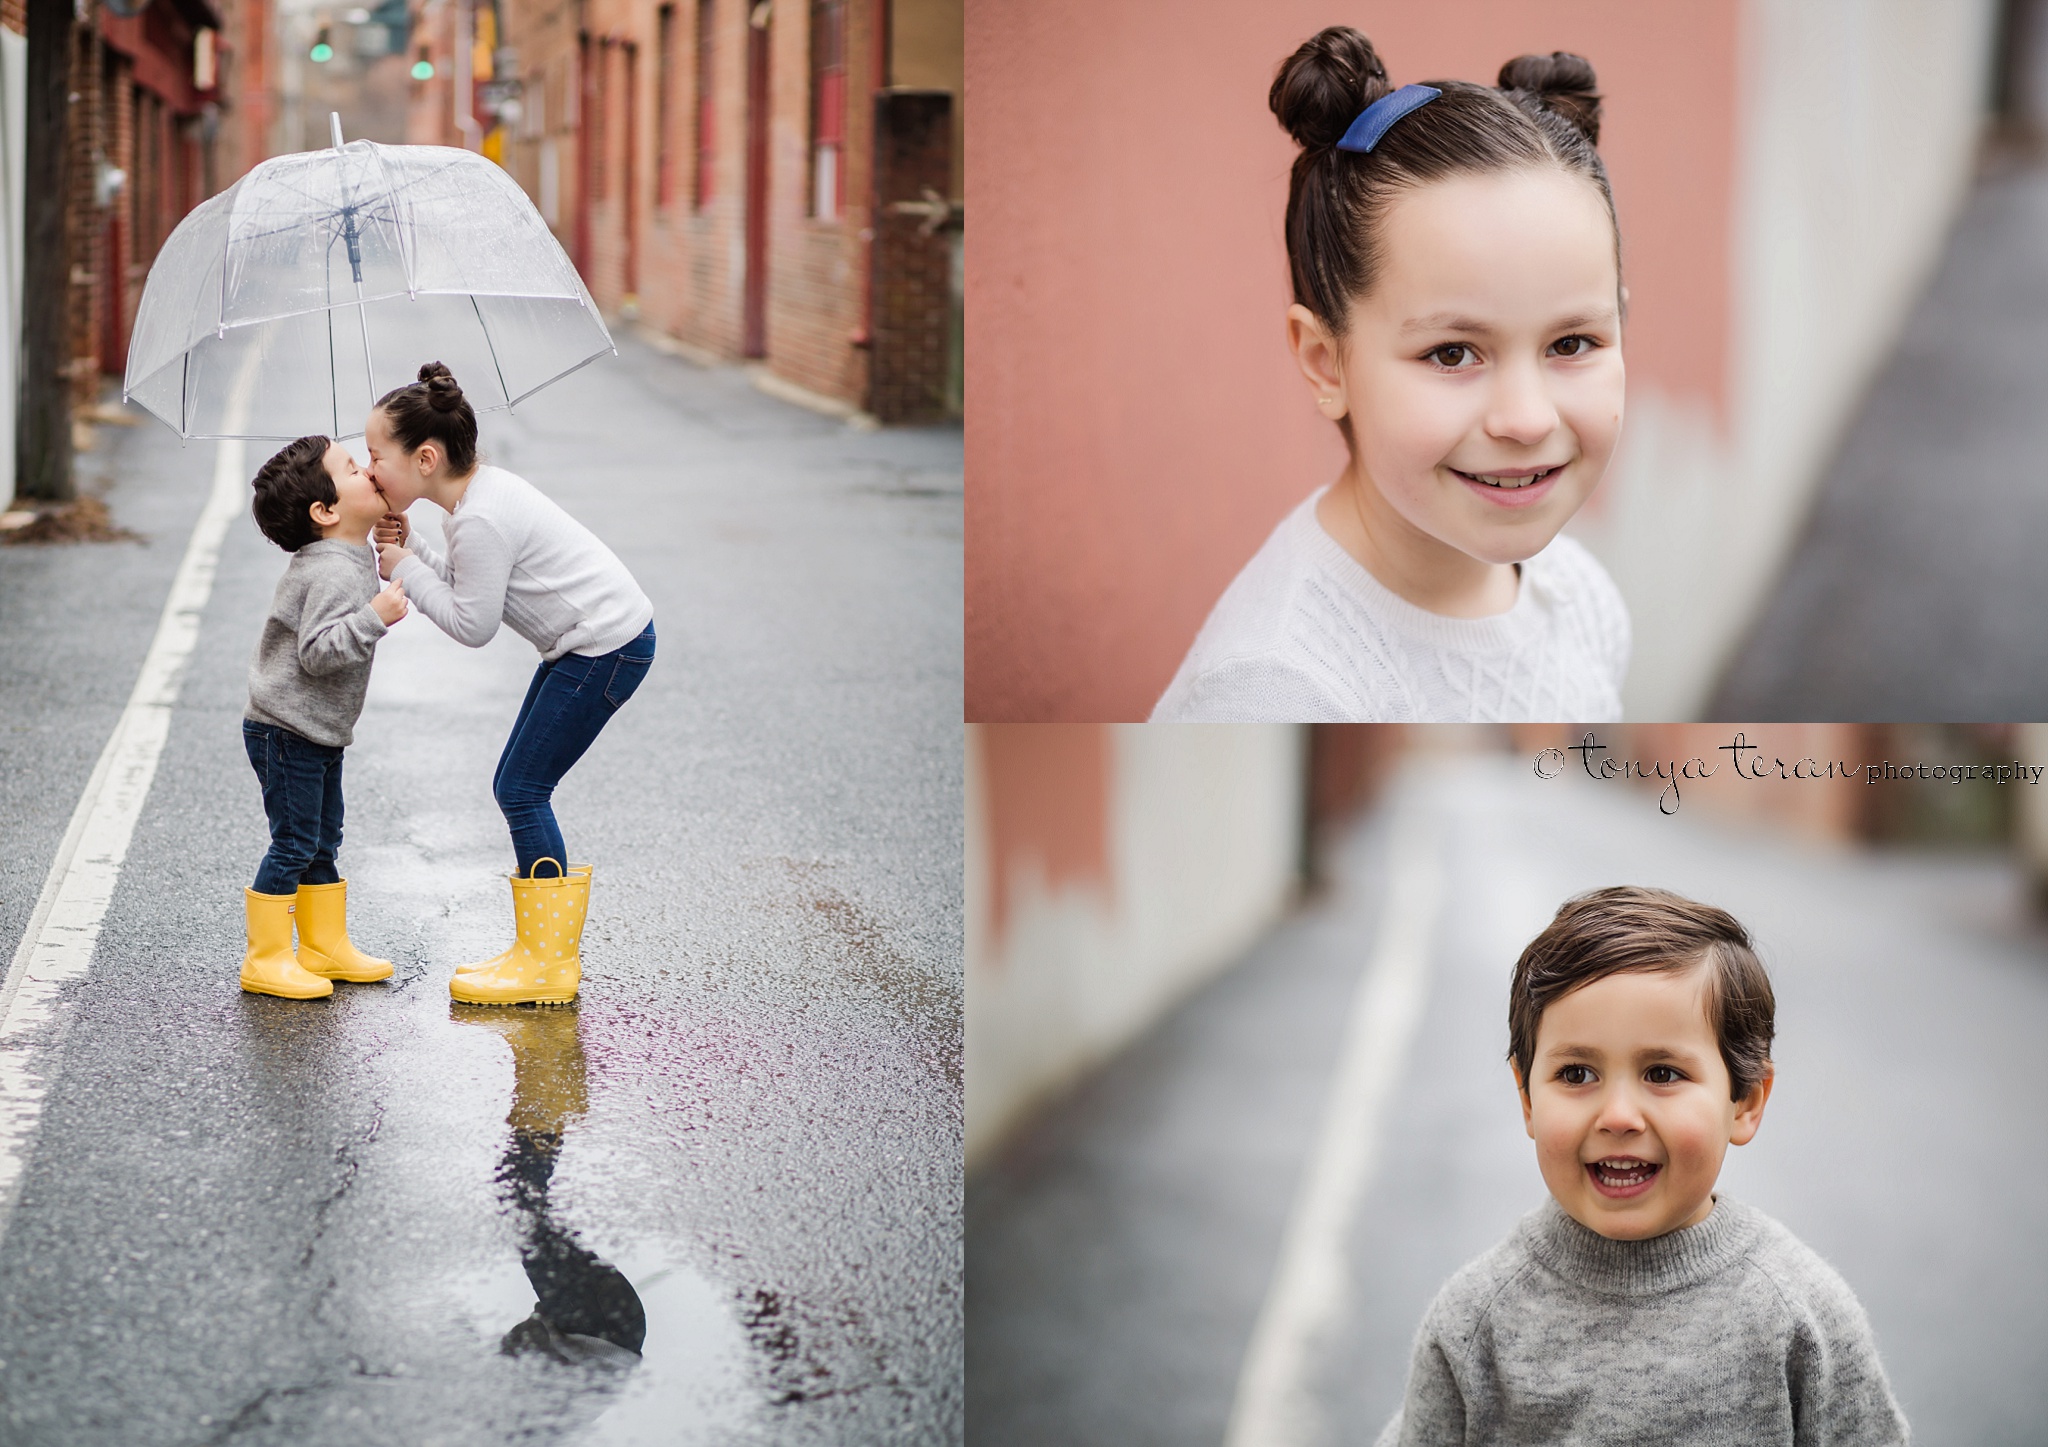 Downtown Sibling Rain Photo Session | Tonya Teran Photography, Frederick, MD Newborn, Baby, and Family Photographer